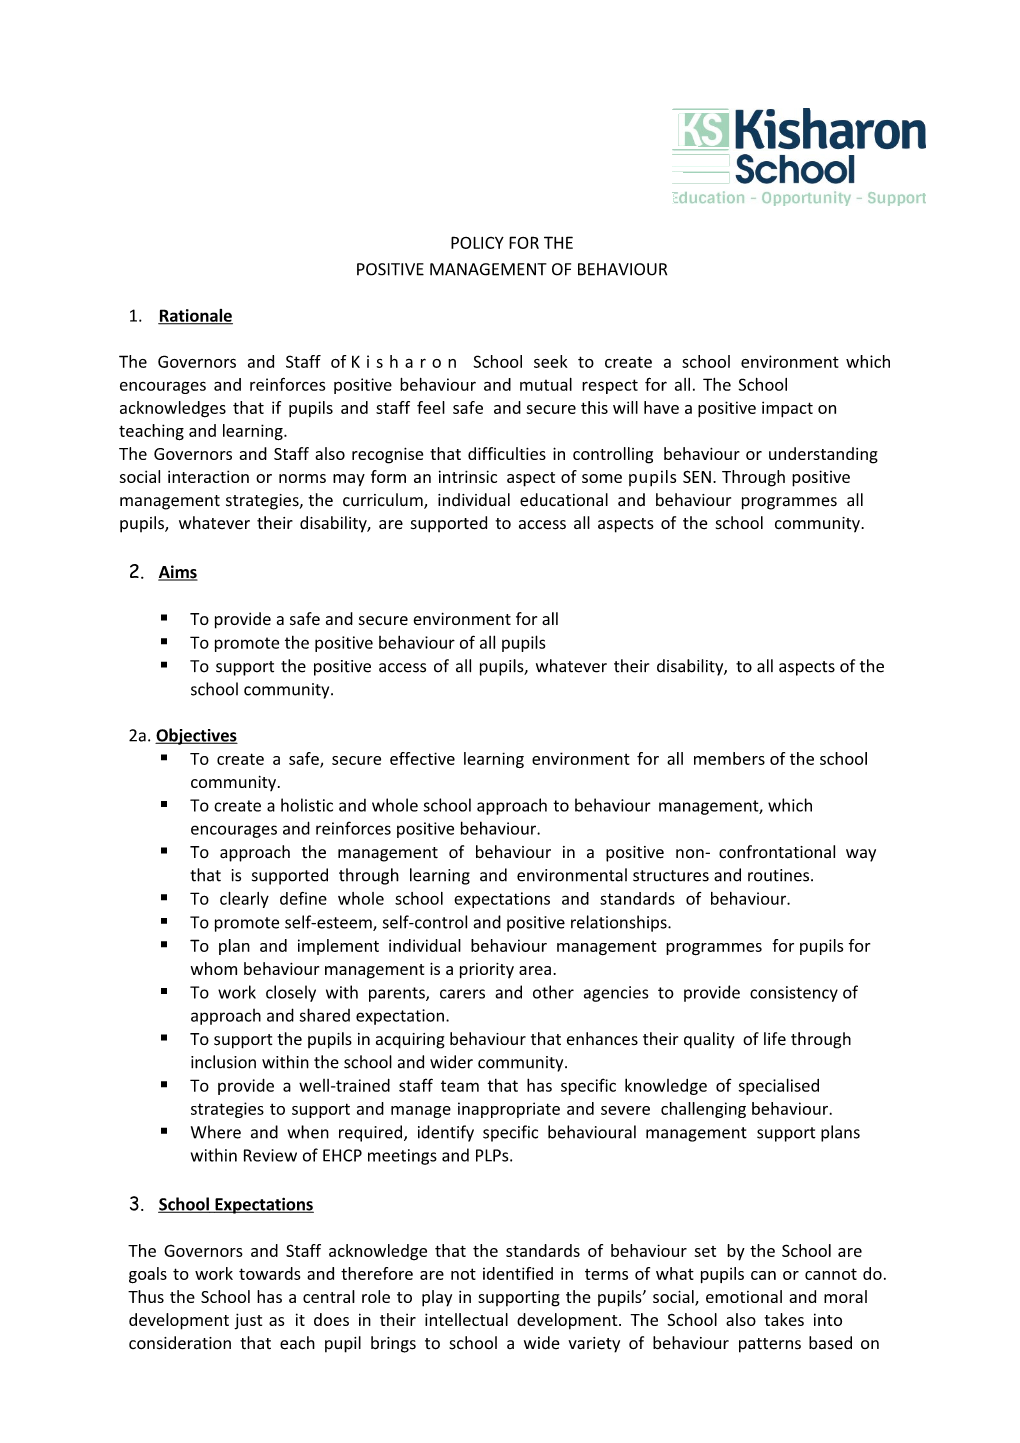 Springfield School Policy for the Positive Management of Behaviour